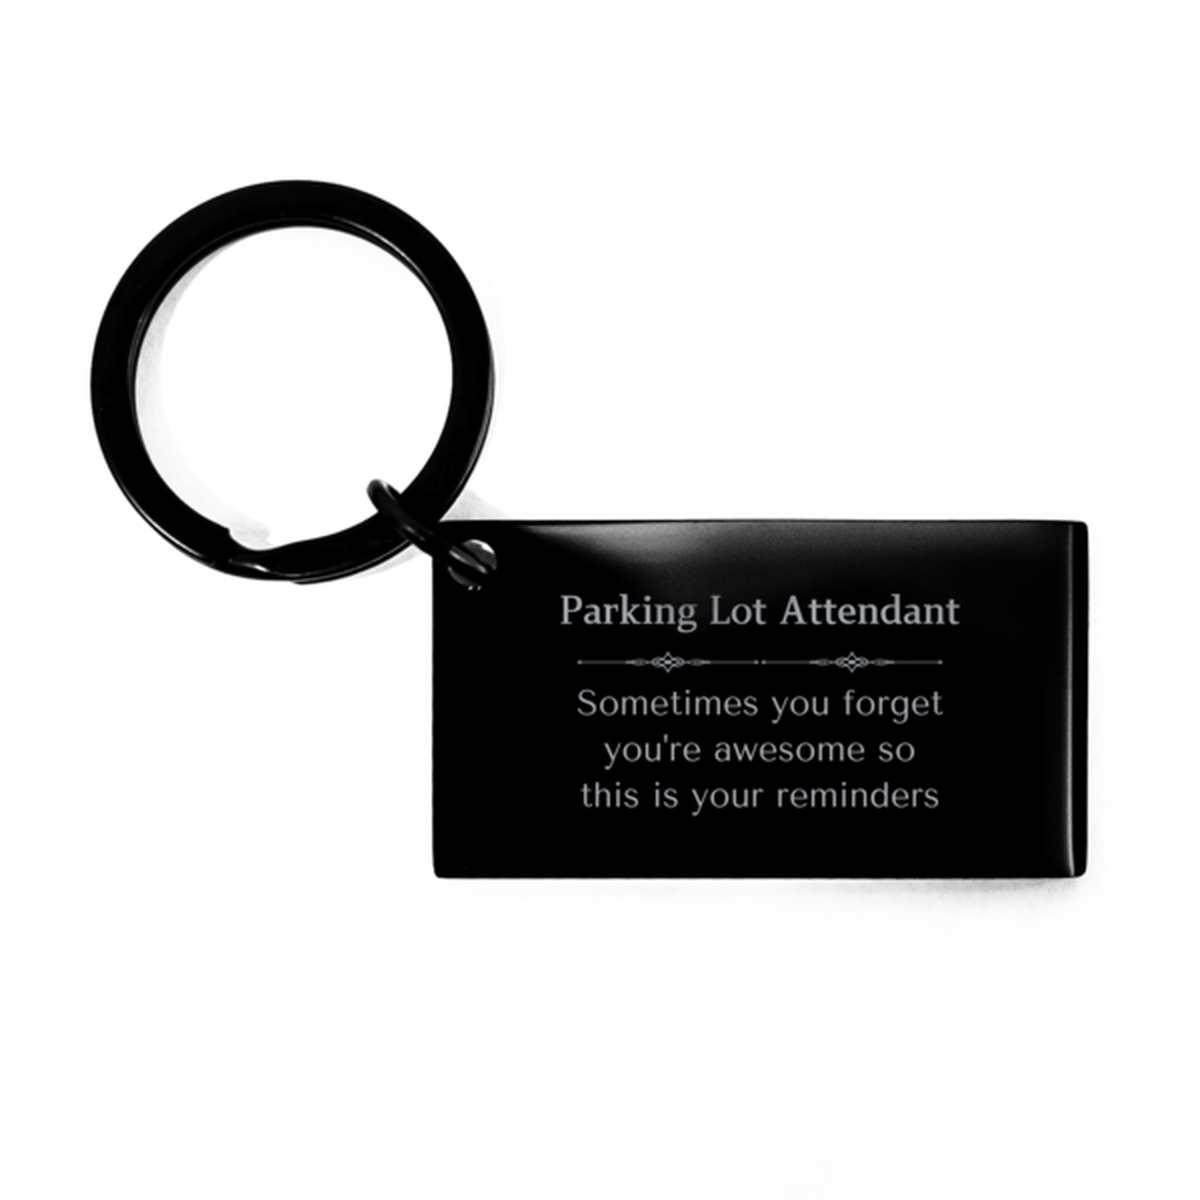 Sentimental Parking Lot Attendant Keychain, Psychologist Sometimes you forget you're awesome so this is your reminders, Graduation Christmas Birthday Gifts for Parking Lot Attendant, Men, Women, Coworkers